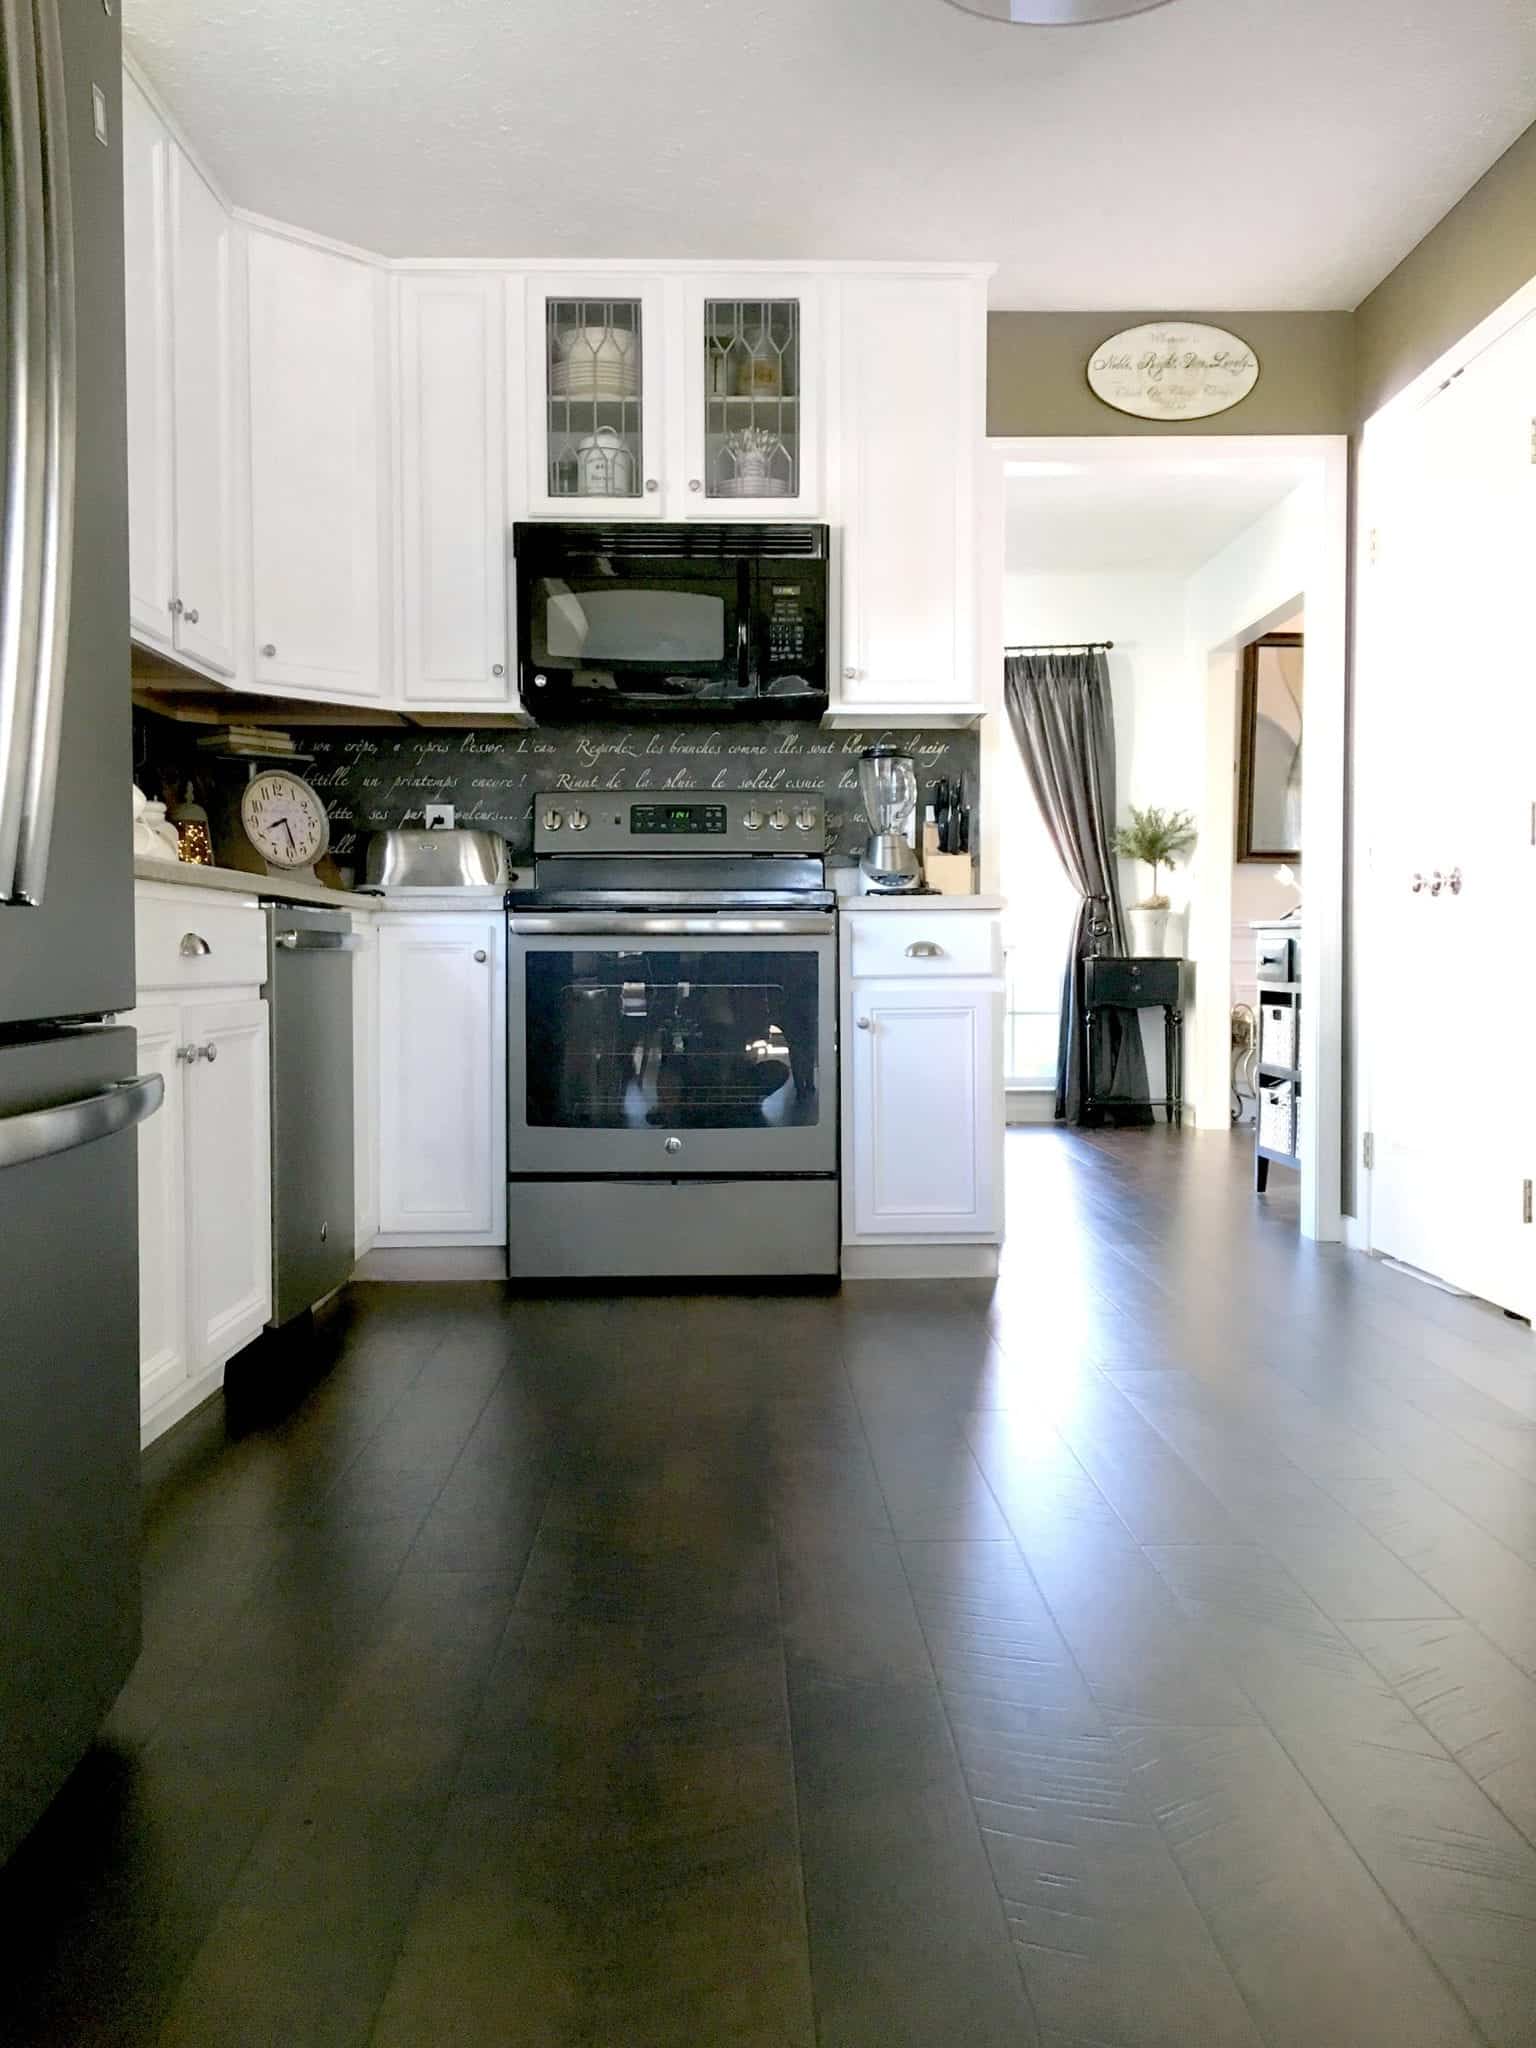 Pergo Flooring: Our Kitchen Reveal! | snazzy little things1536 x 2048